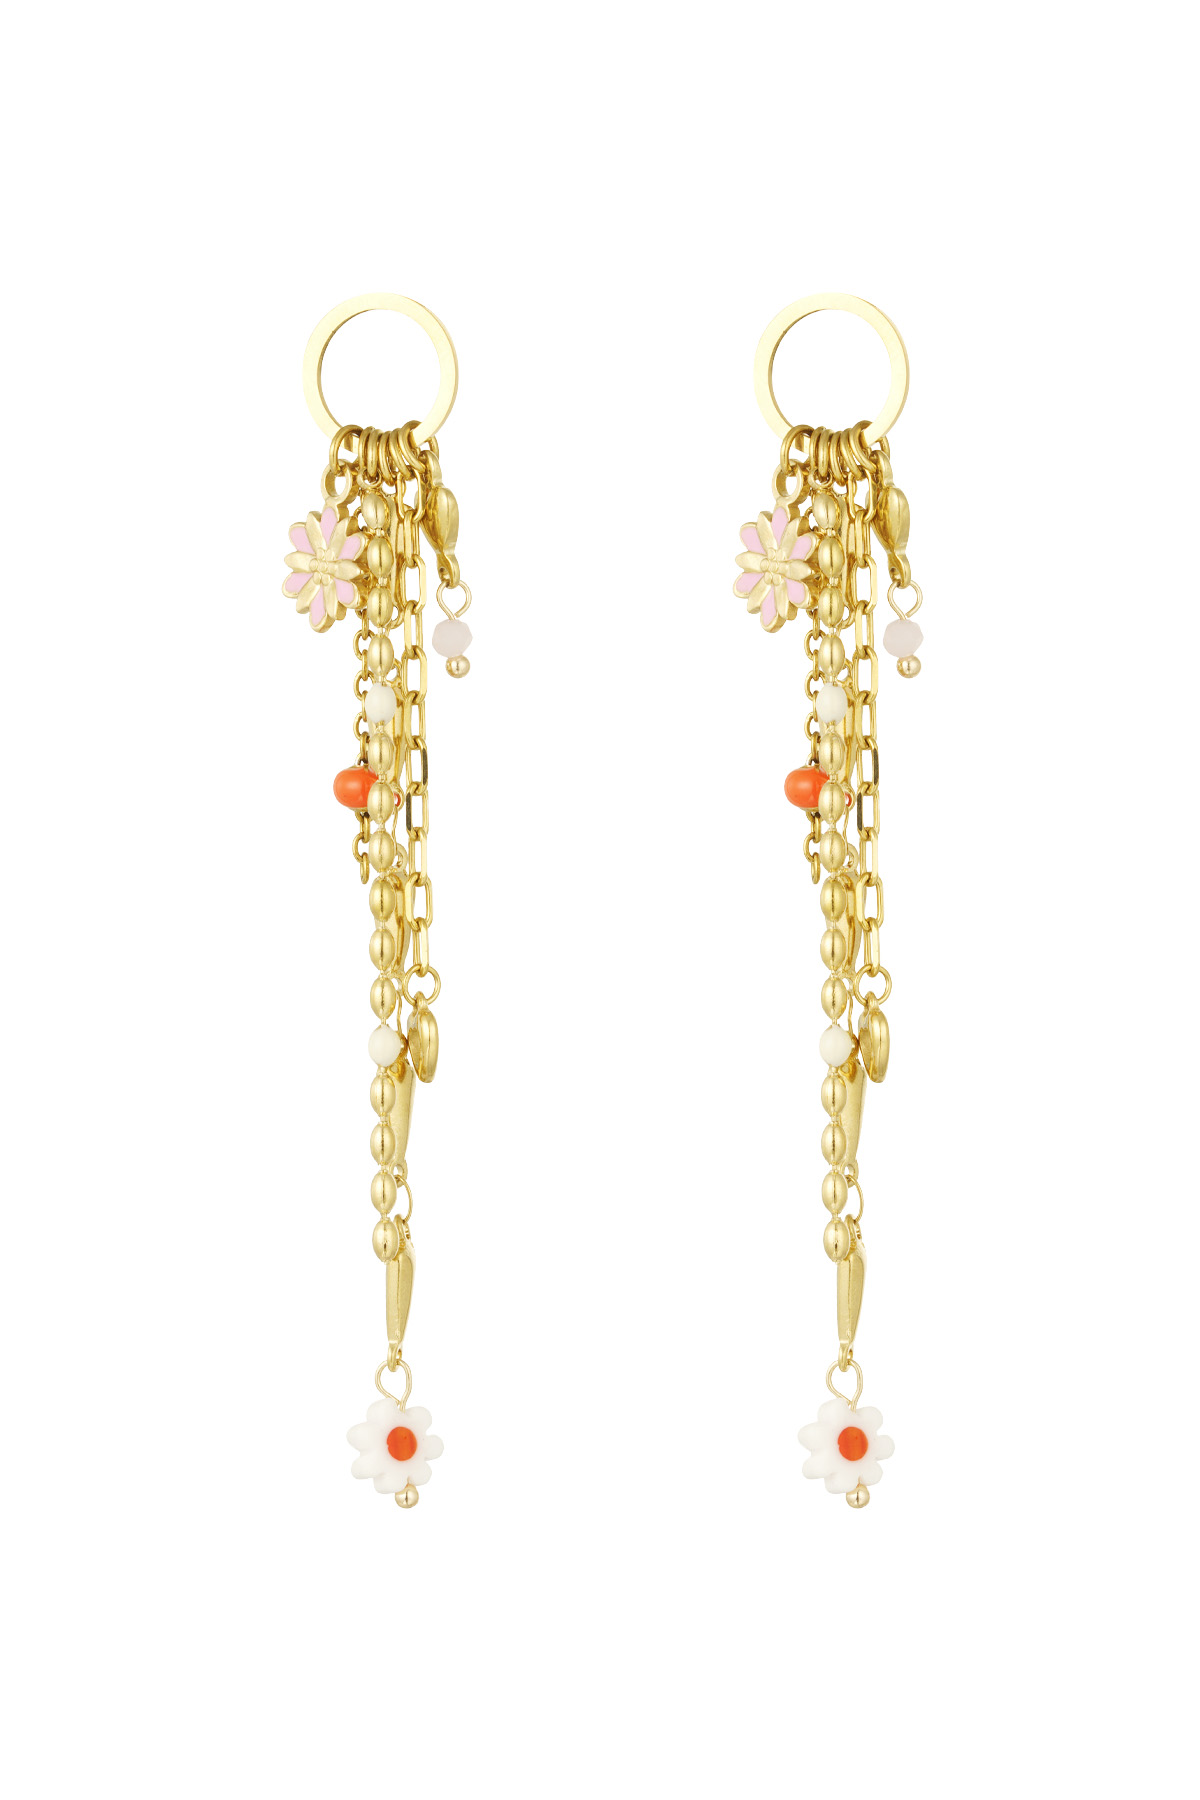 Earrings mistic muse - pink gold